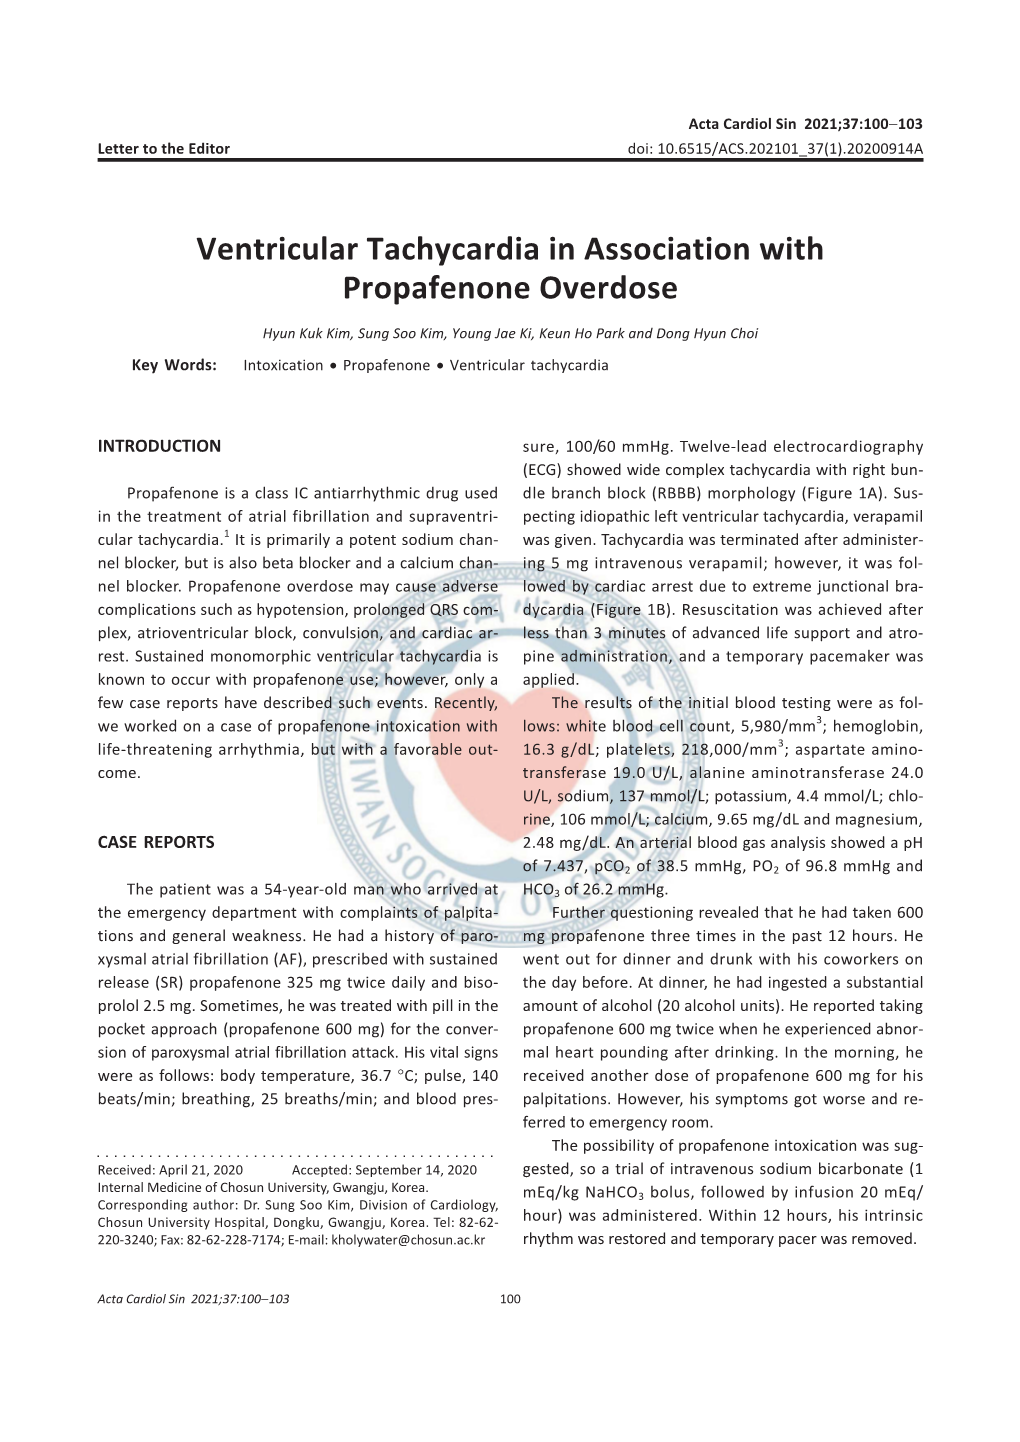 Ventricular Tachycardia in Association with Propafenone Overdose